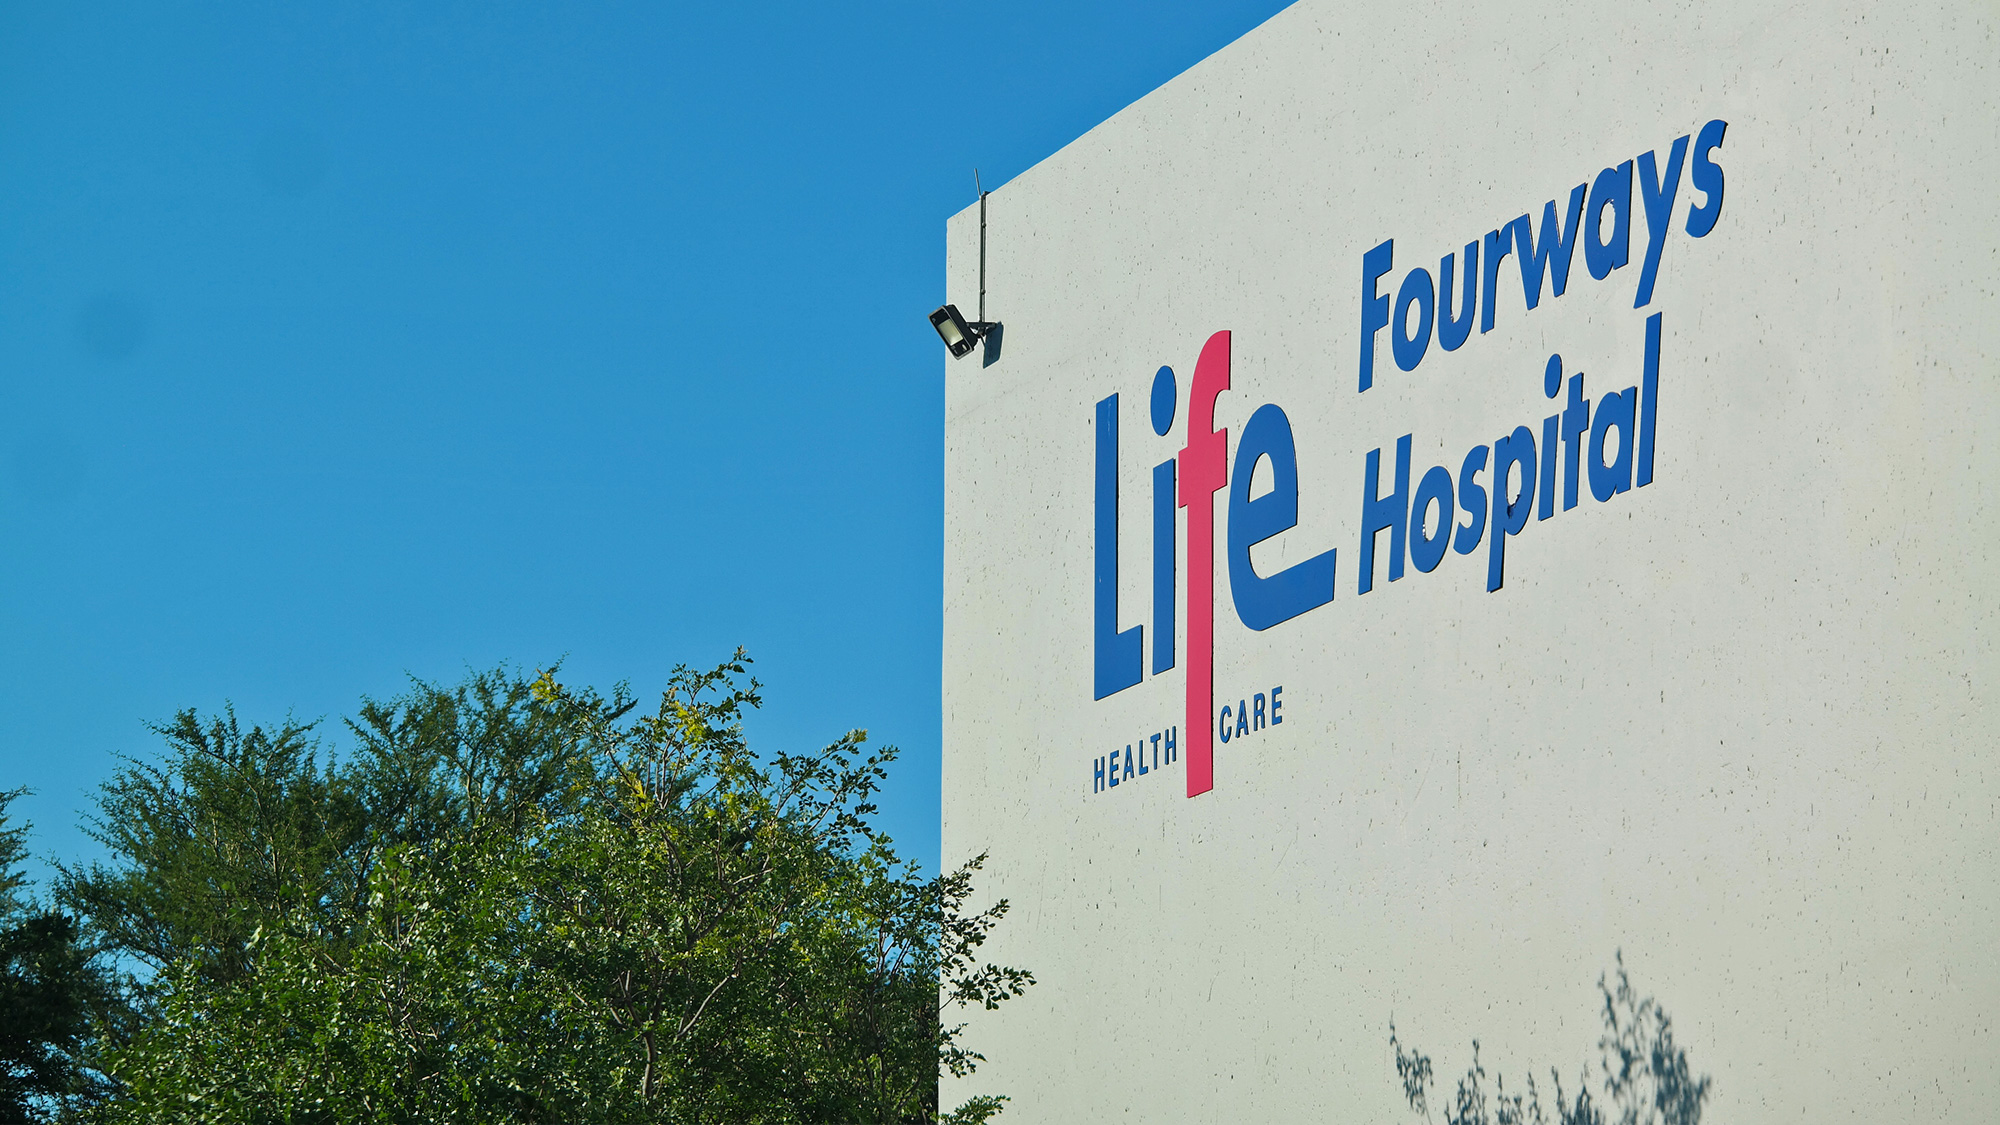 Life Fourways Hospital Store Assistant